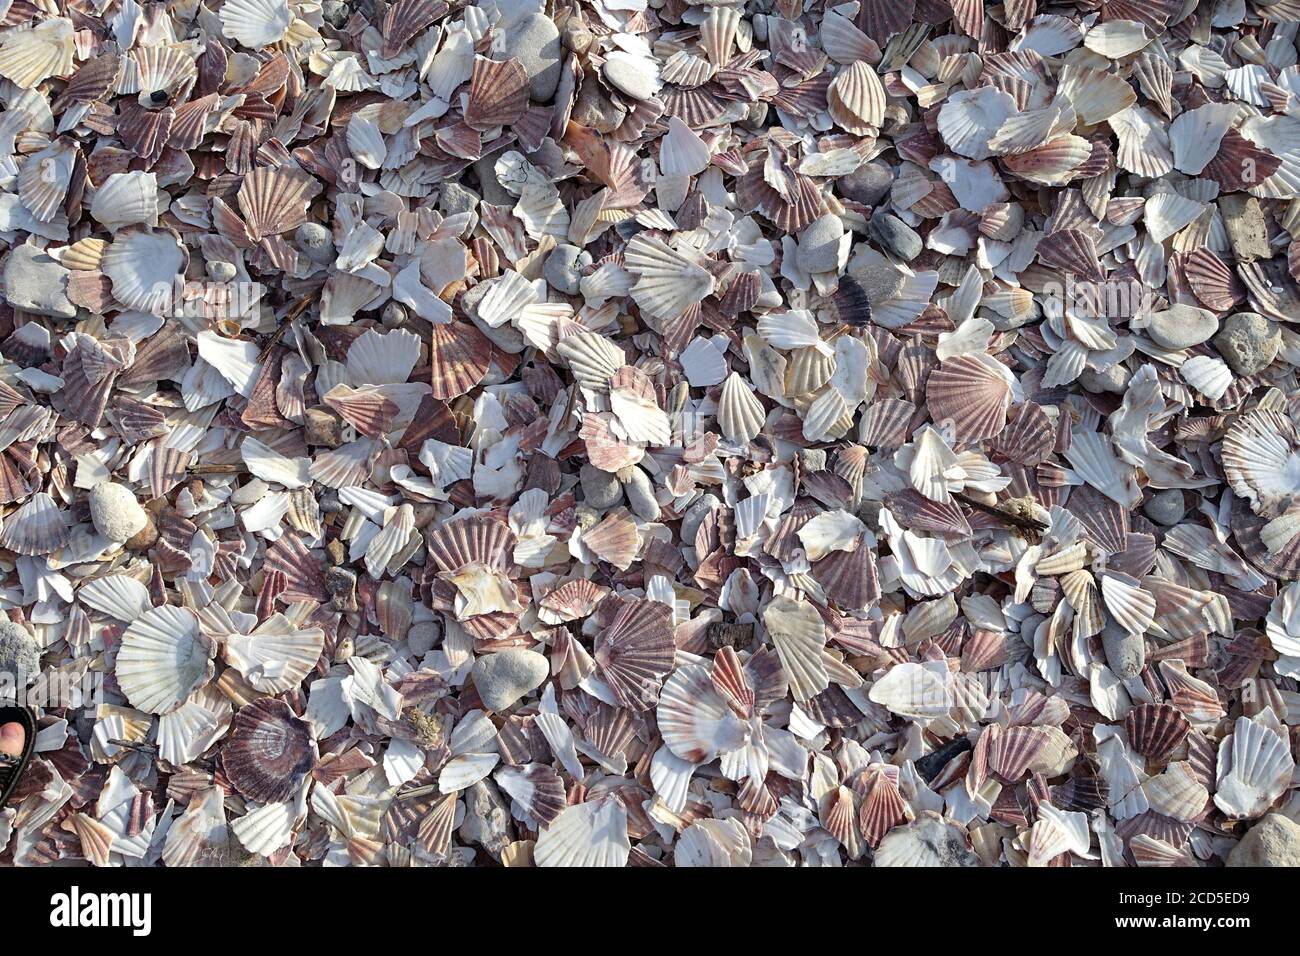 Background of beach covered in bits of scallop shells packed together in a thick layer Stock Photo